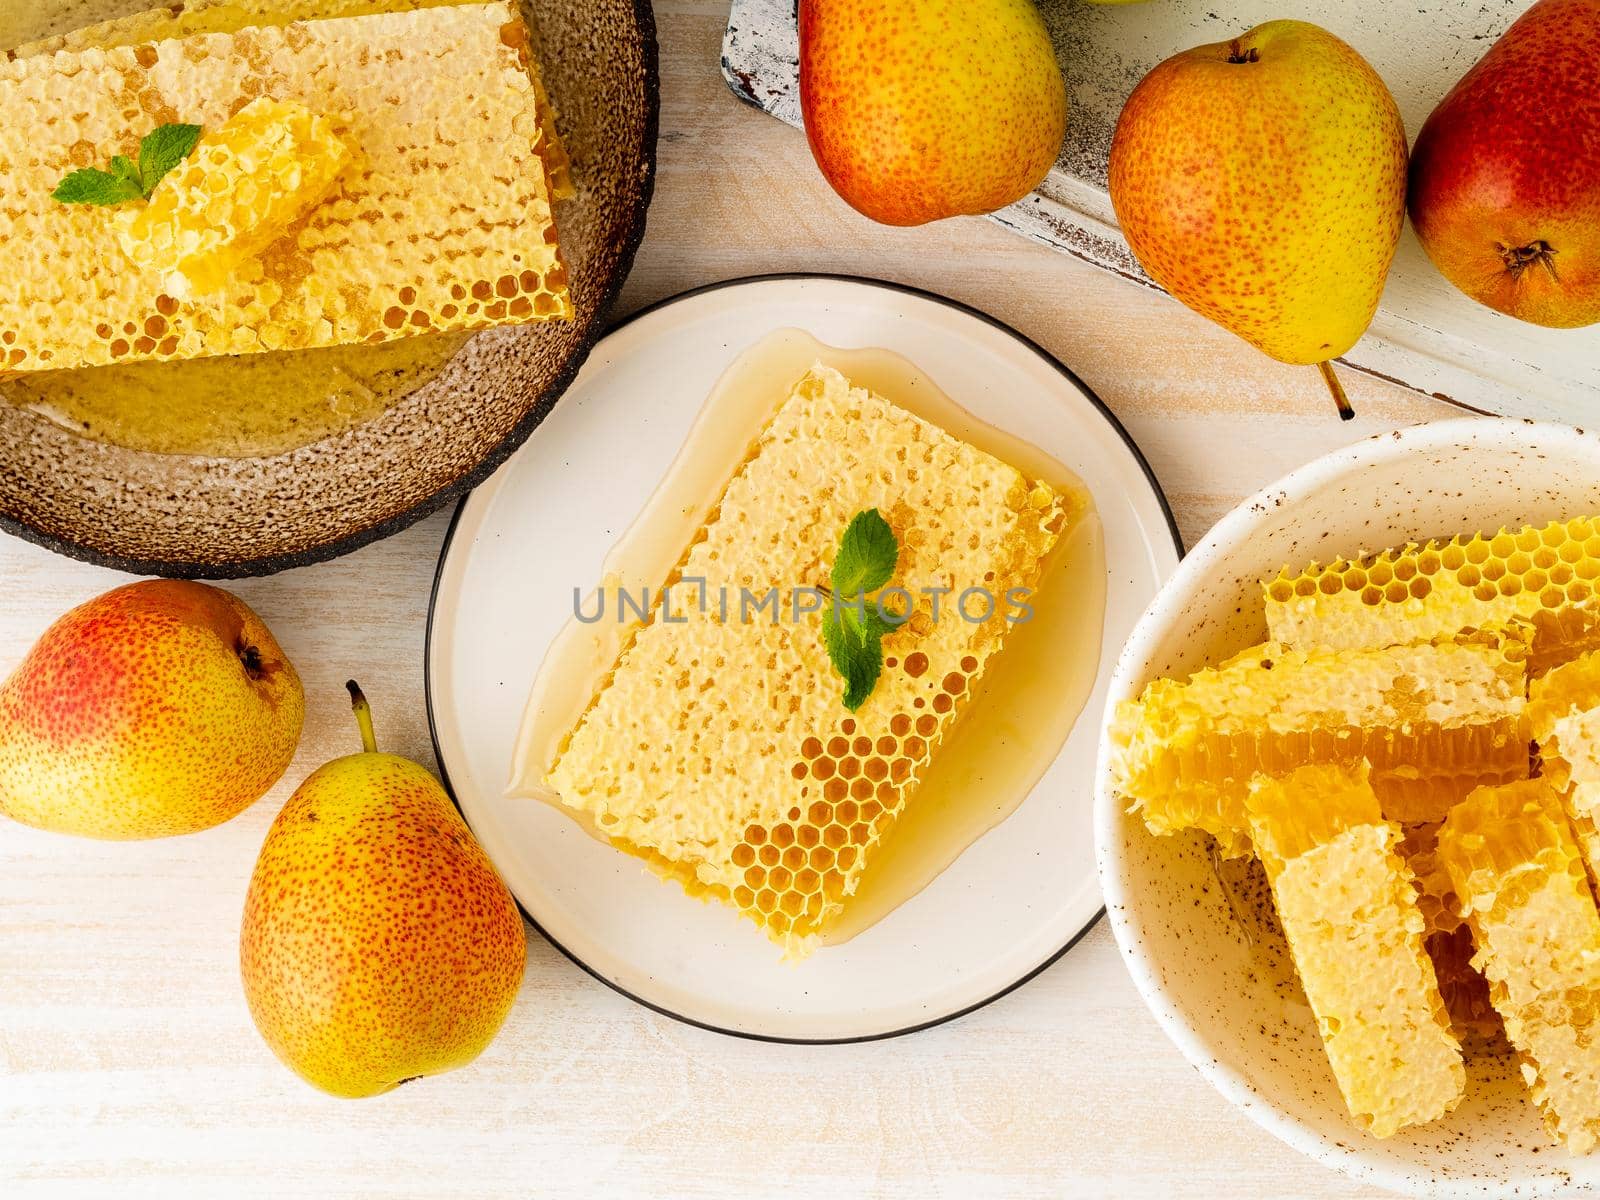 honey in honeycomb, close-up, on brown ceramic plate, on white wooden rustic table, top view. by NataBene